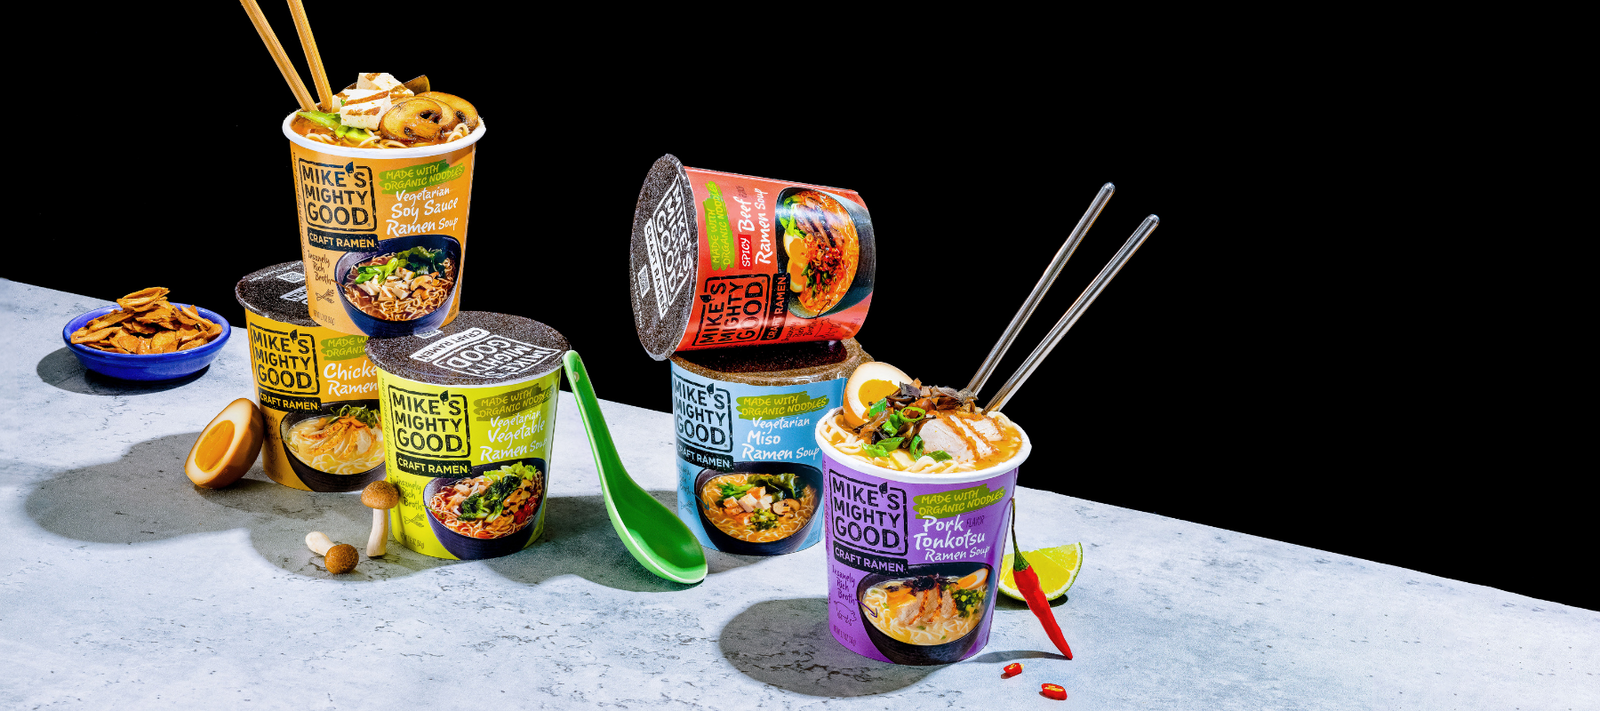 Mike's Mighty Good Craft Ramen Bowls